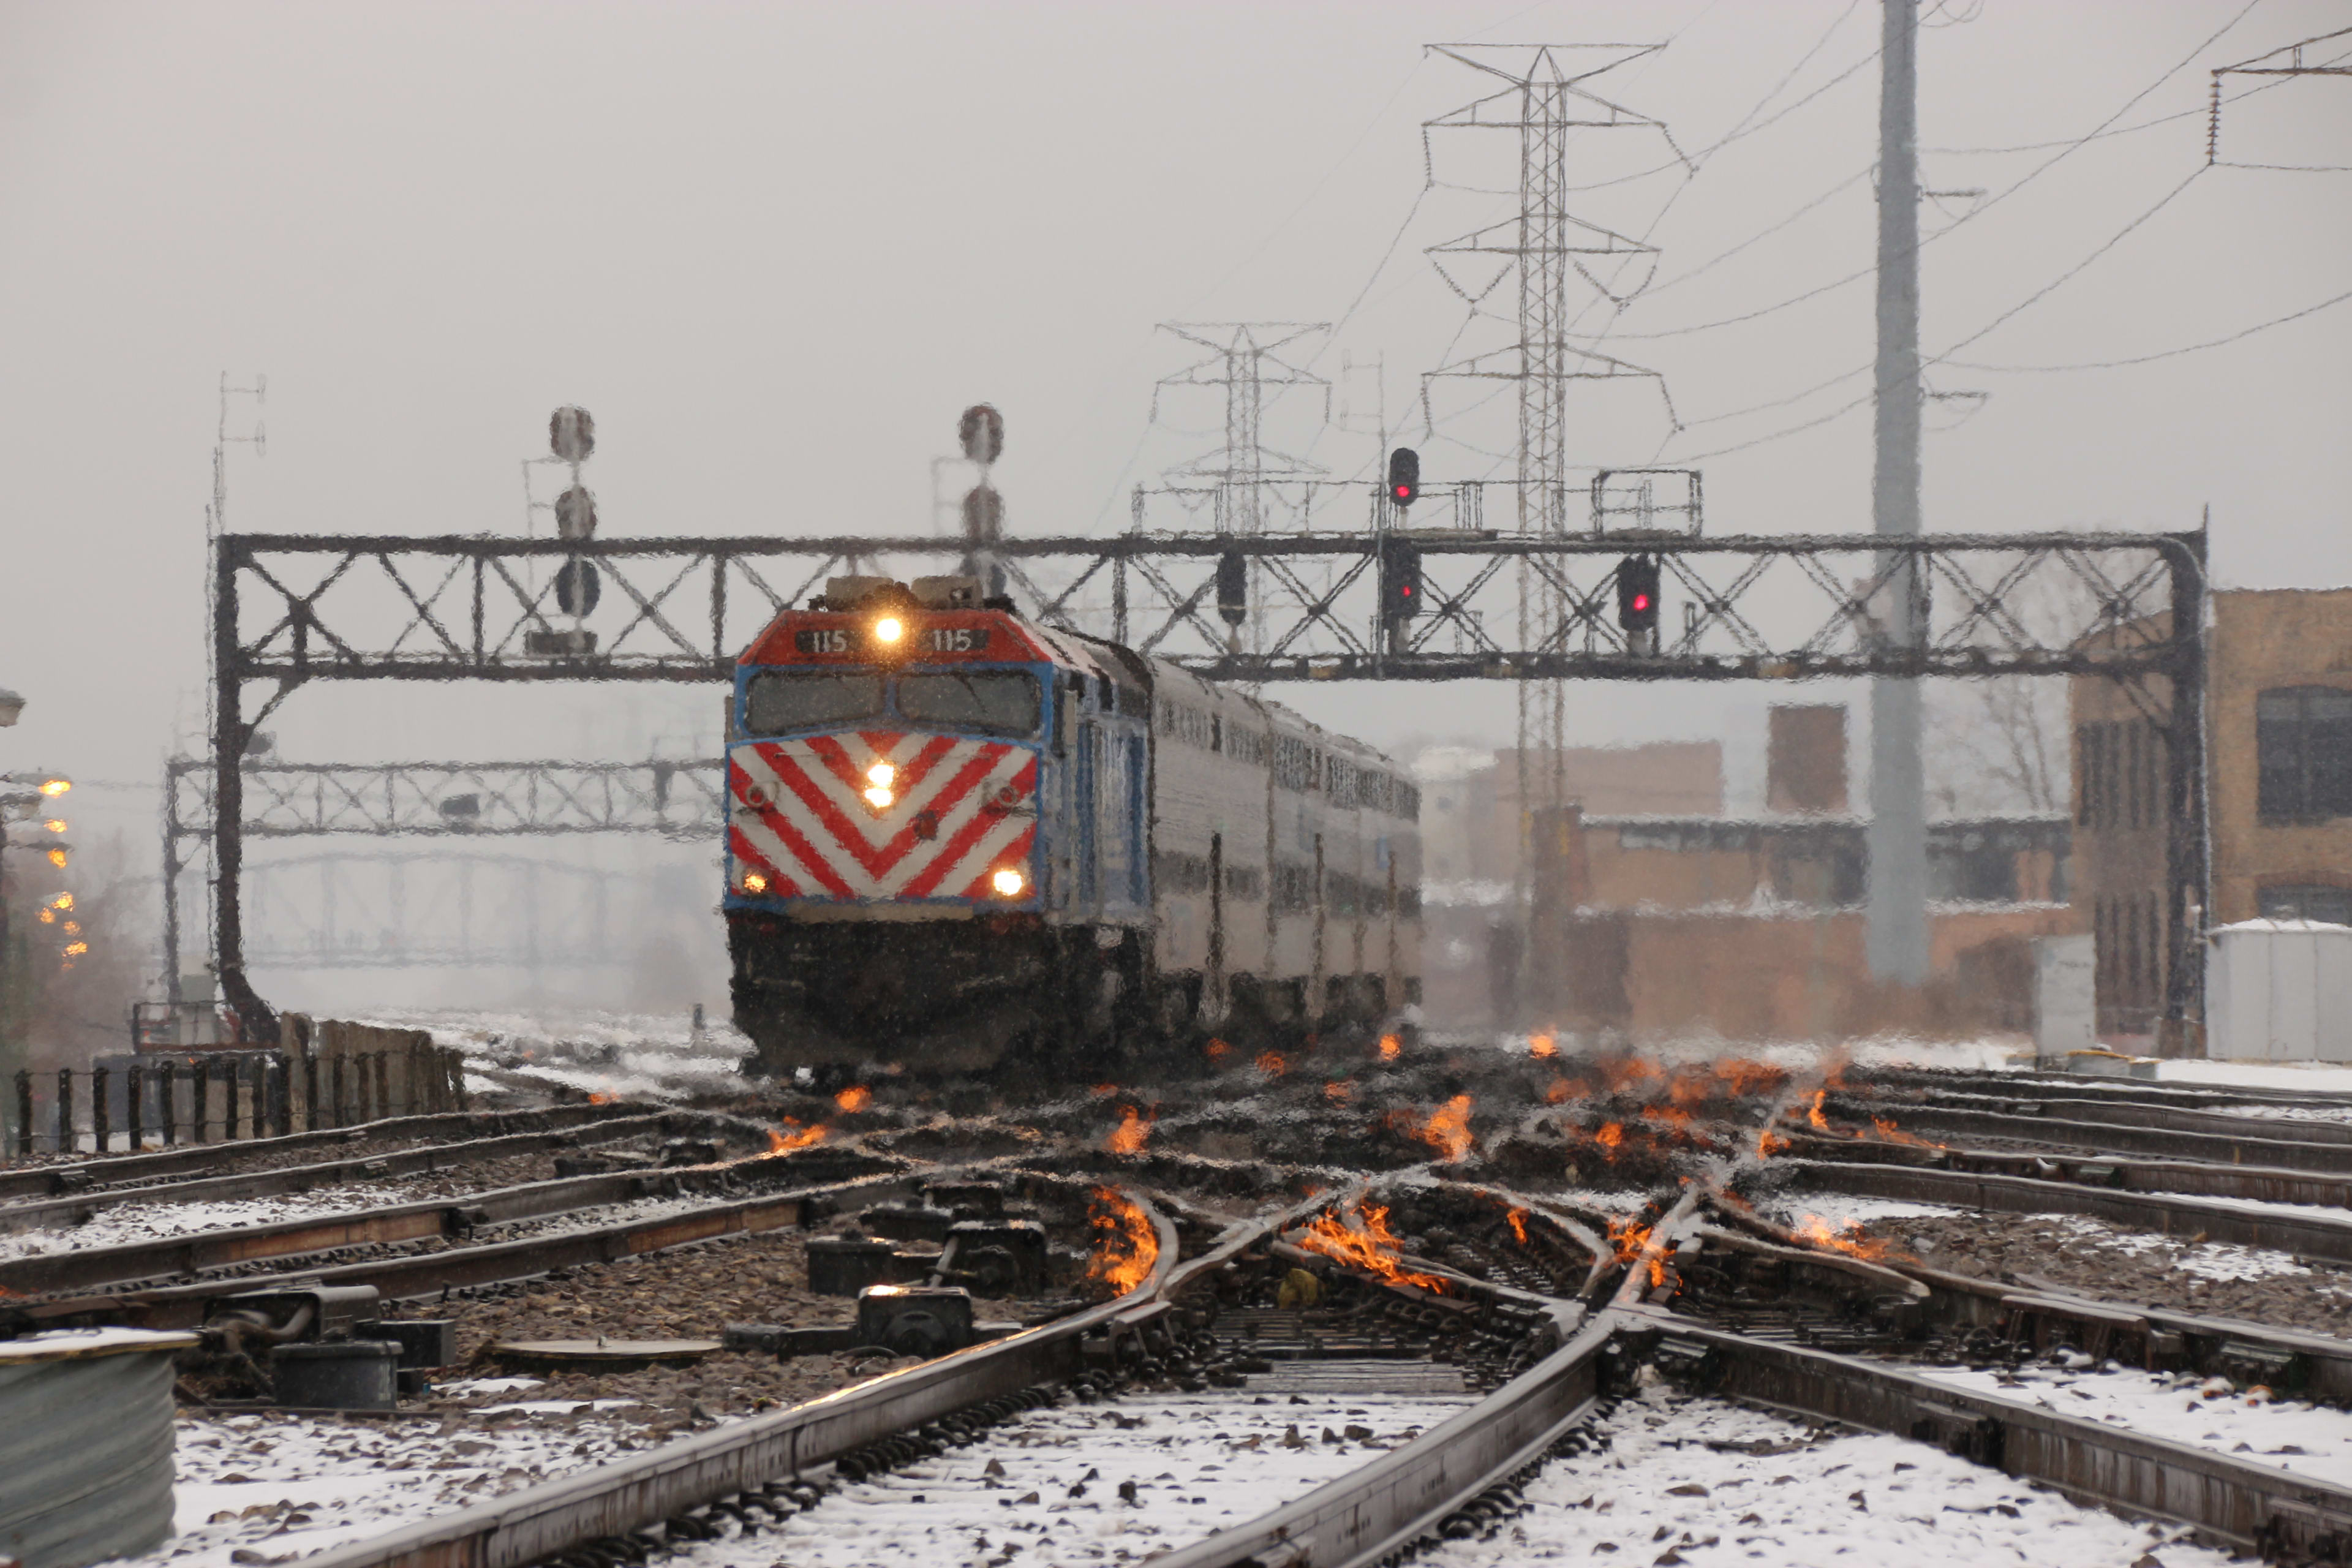 view of the tracks during the day in winter, with gas fired flames on to keep switches clear in C...